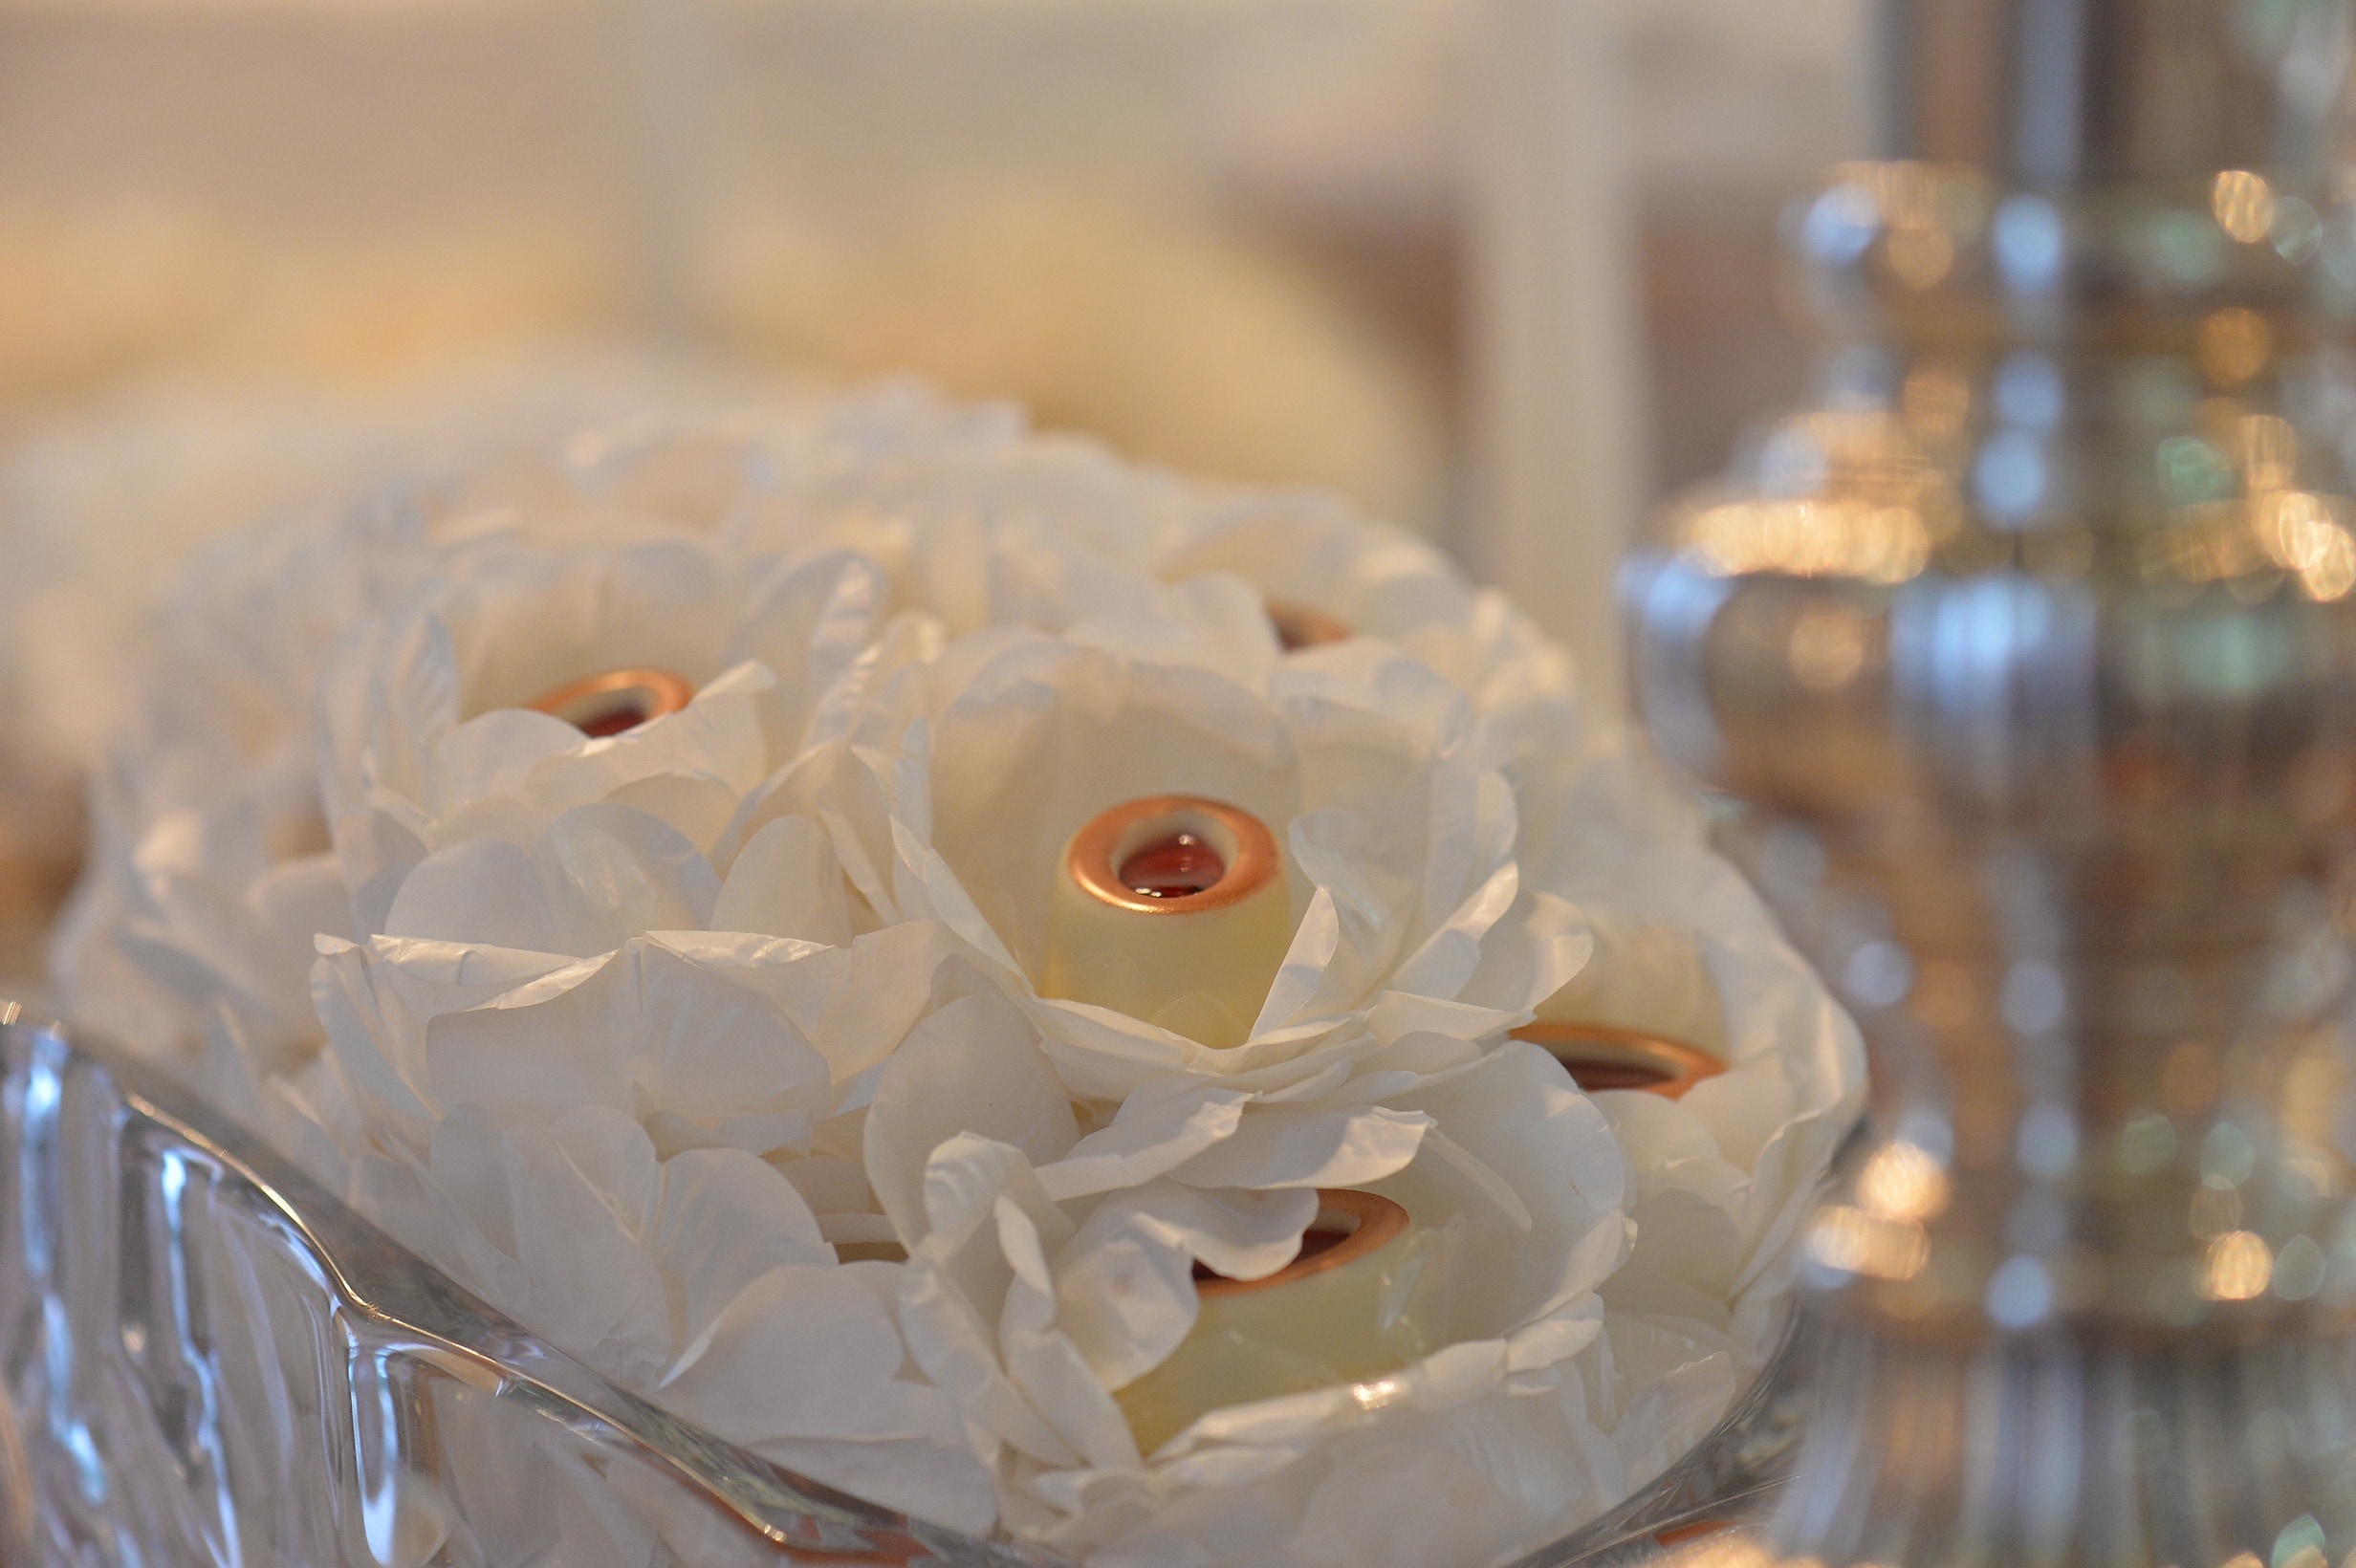 white flower ornament on clear glass bowl